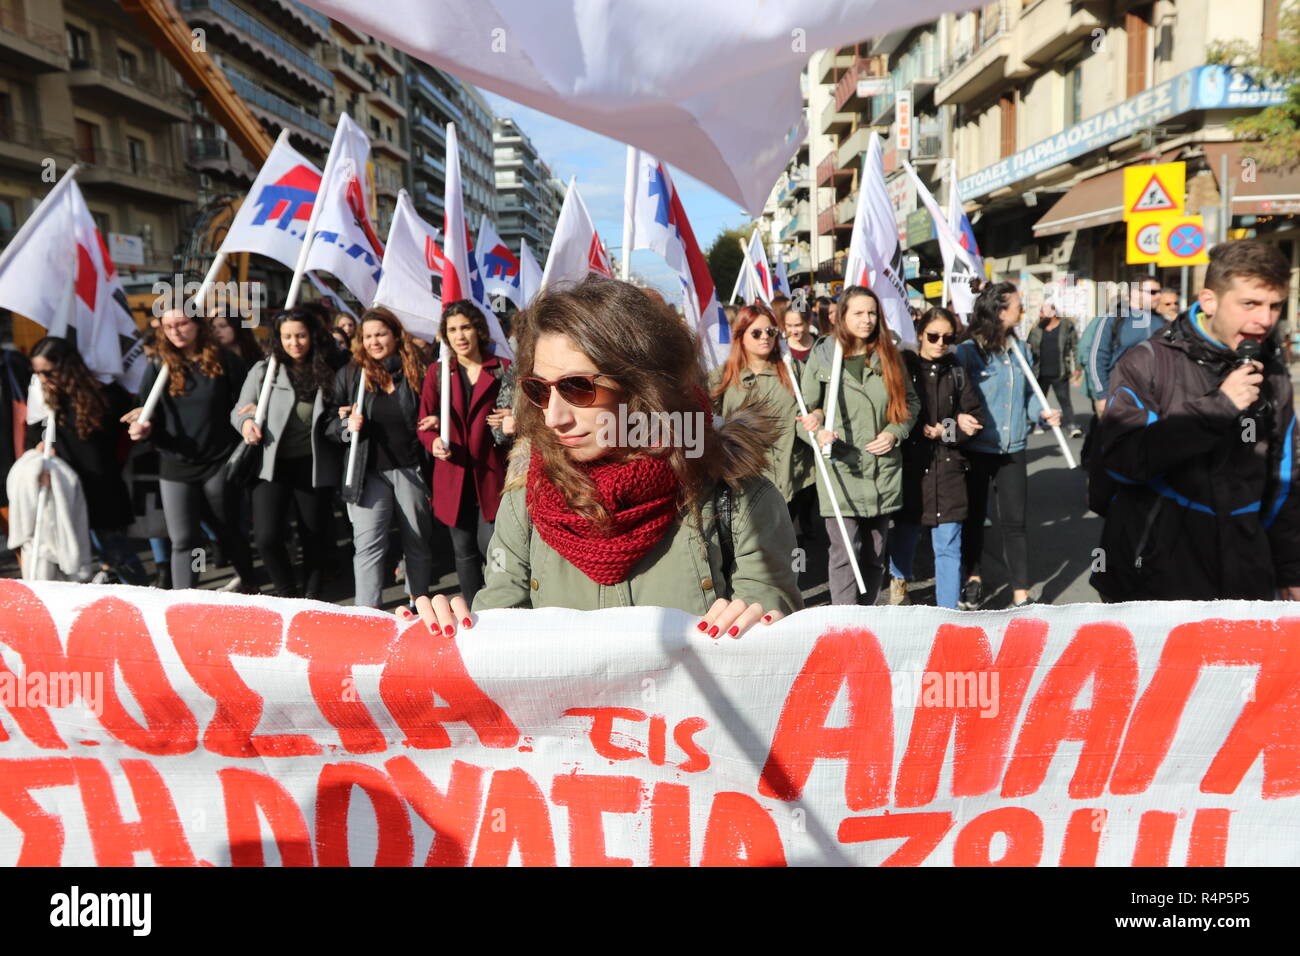 Thessaloniki, Greece, 28th November, 2018.  Students from the communist-affiliated trade union PAME take part in a demonstration during a 24-hour walkout staged by Greece's largest private sector union GSEE  against planned pension cuts and to demand the reversal of labour reforms implemented under the country's third bailout. The strike by the GSEE union is the second major strike since Greece exited its bailout programme in August. Credit : Orhan Tsolak / Alamy Live News. Stock Photo